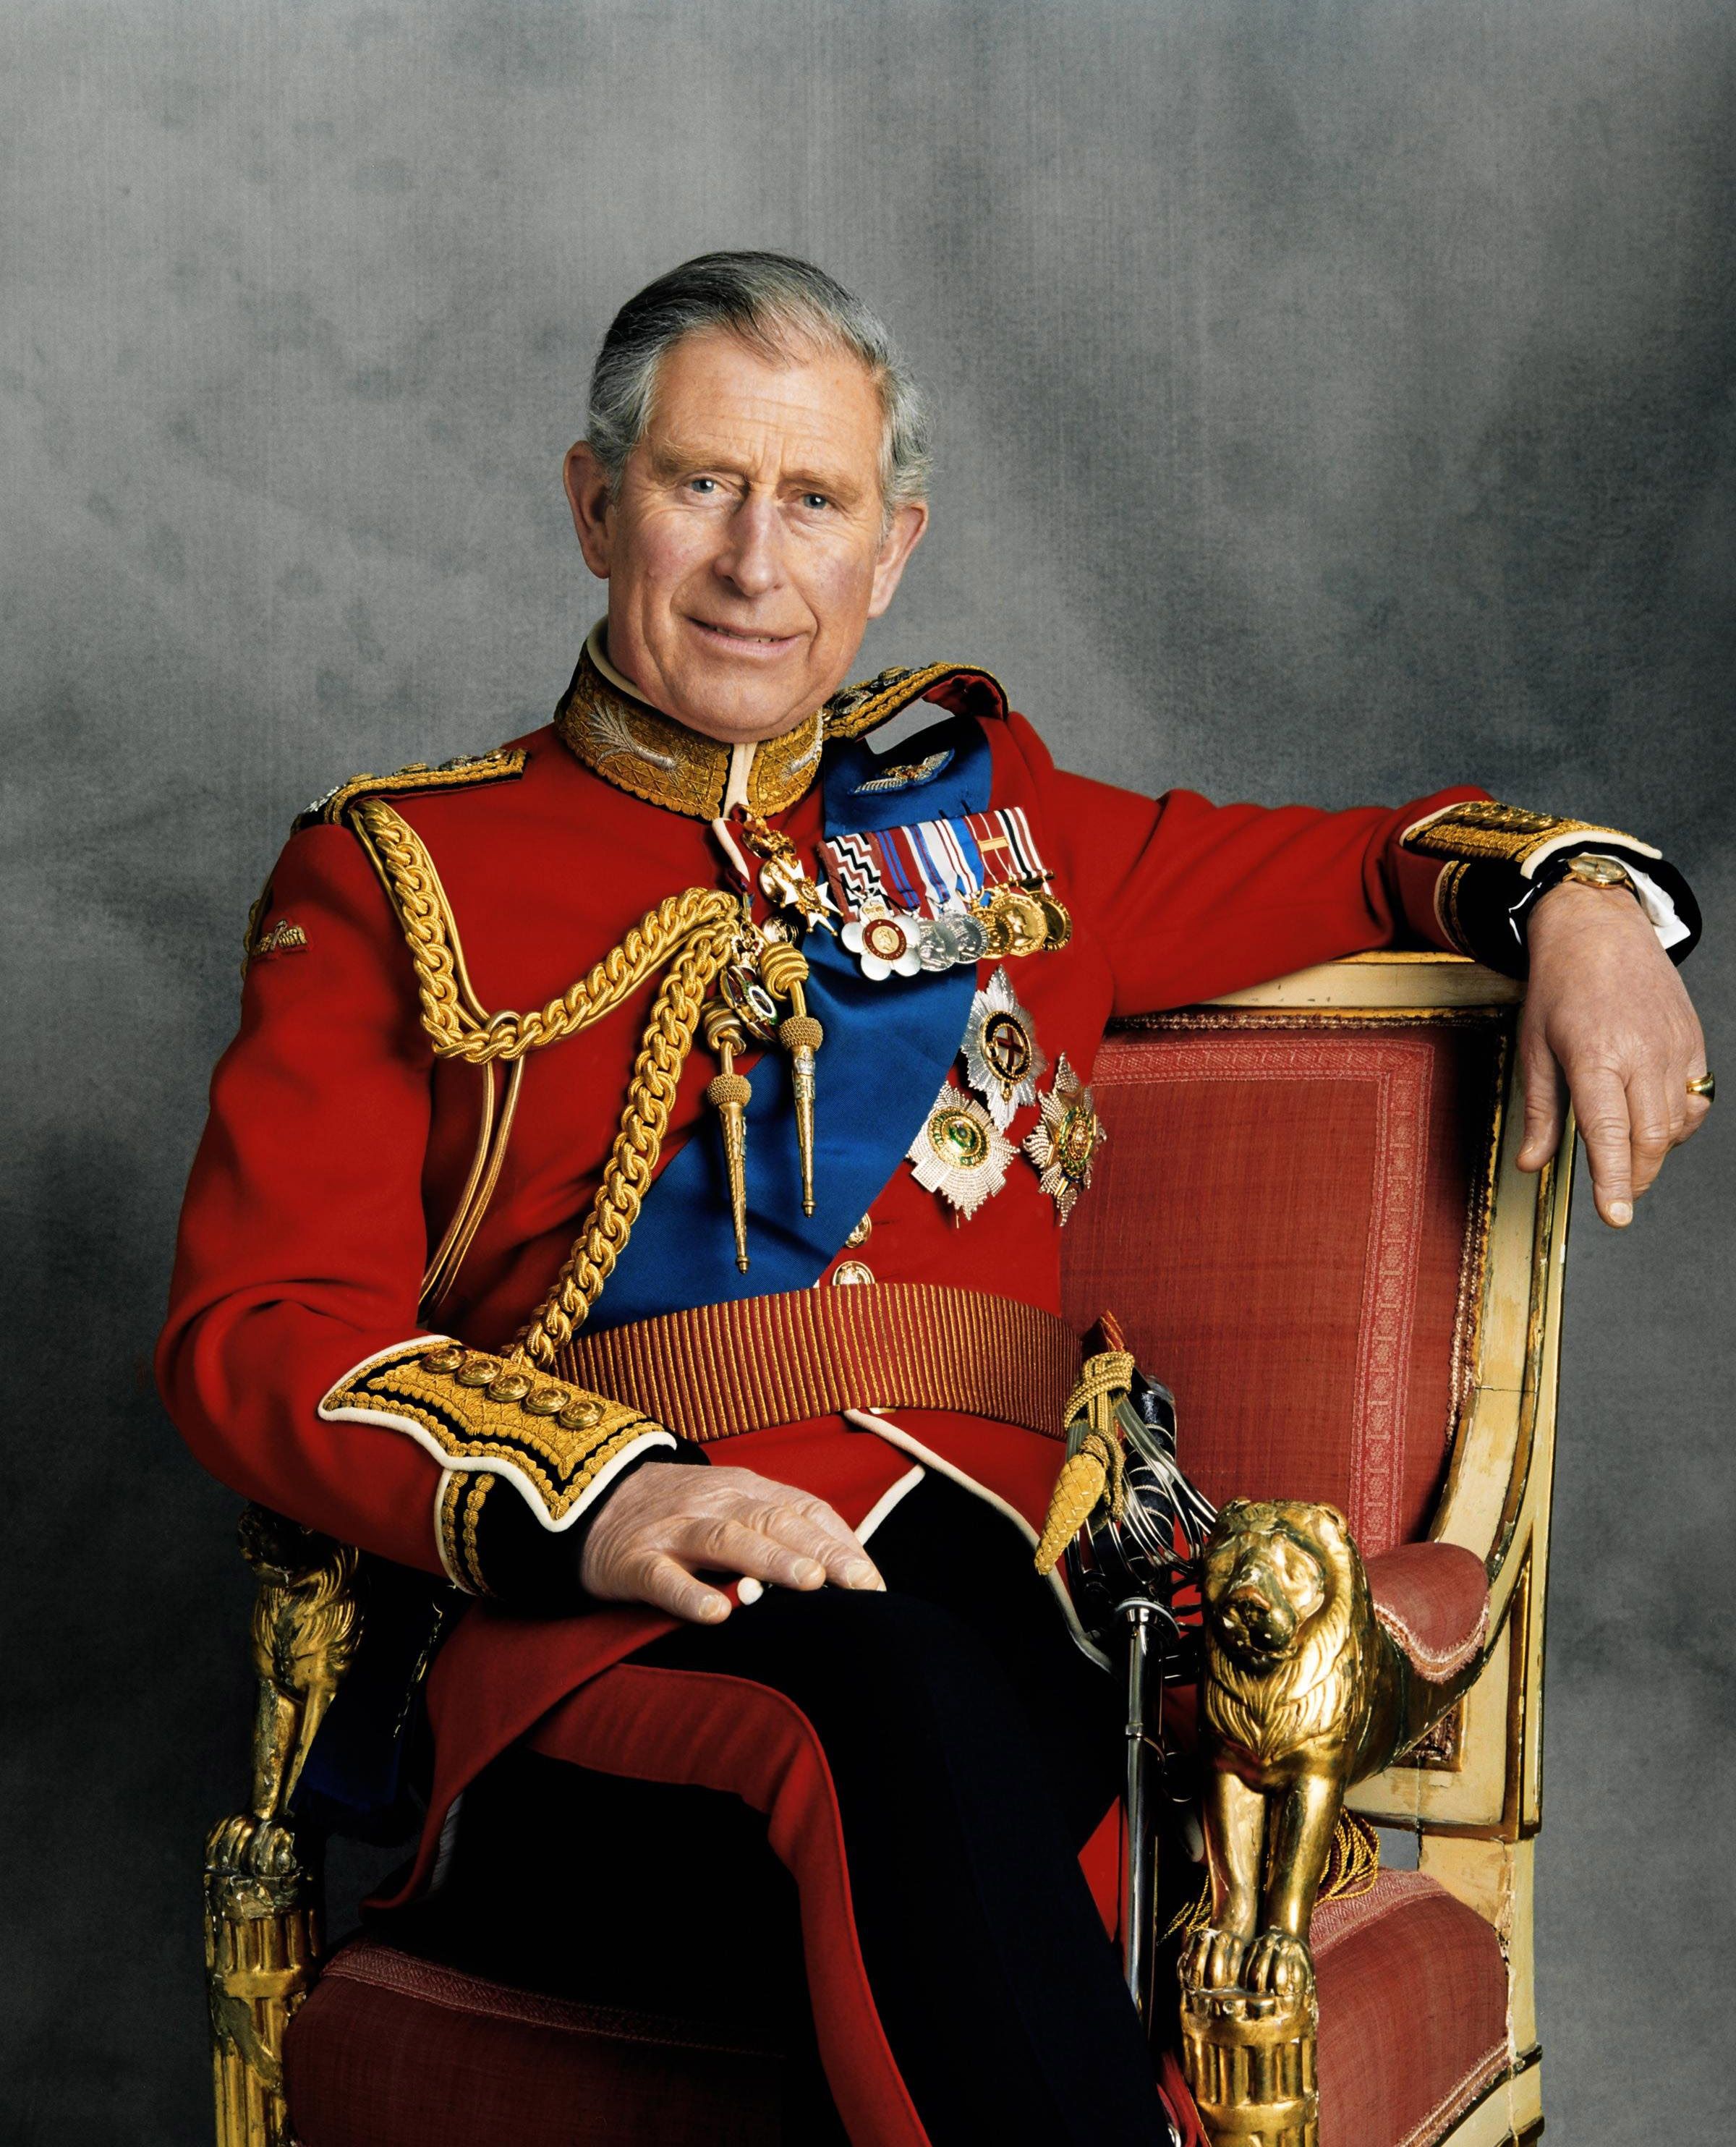 Prince Charles Is King of the United Kingdom After Queen Elizabeth's Death